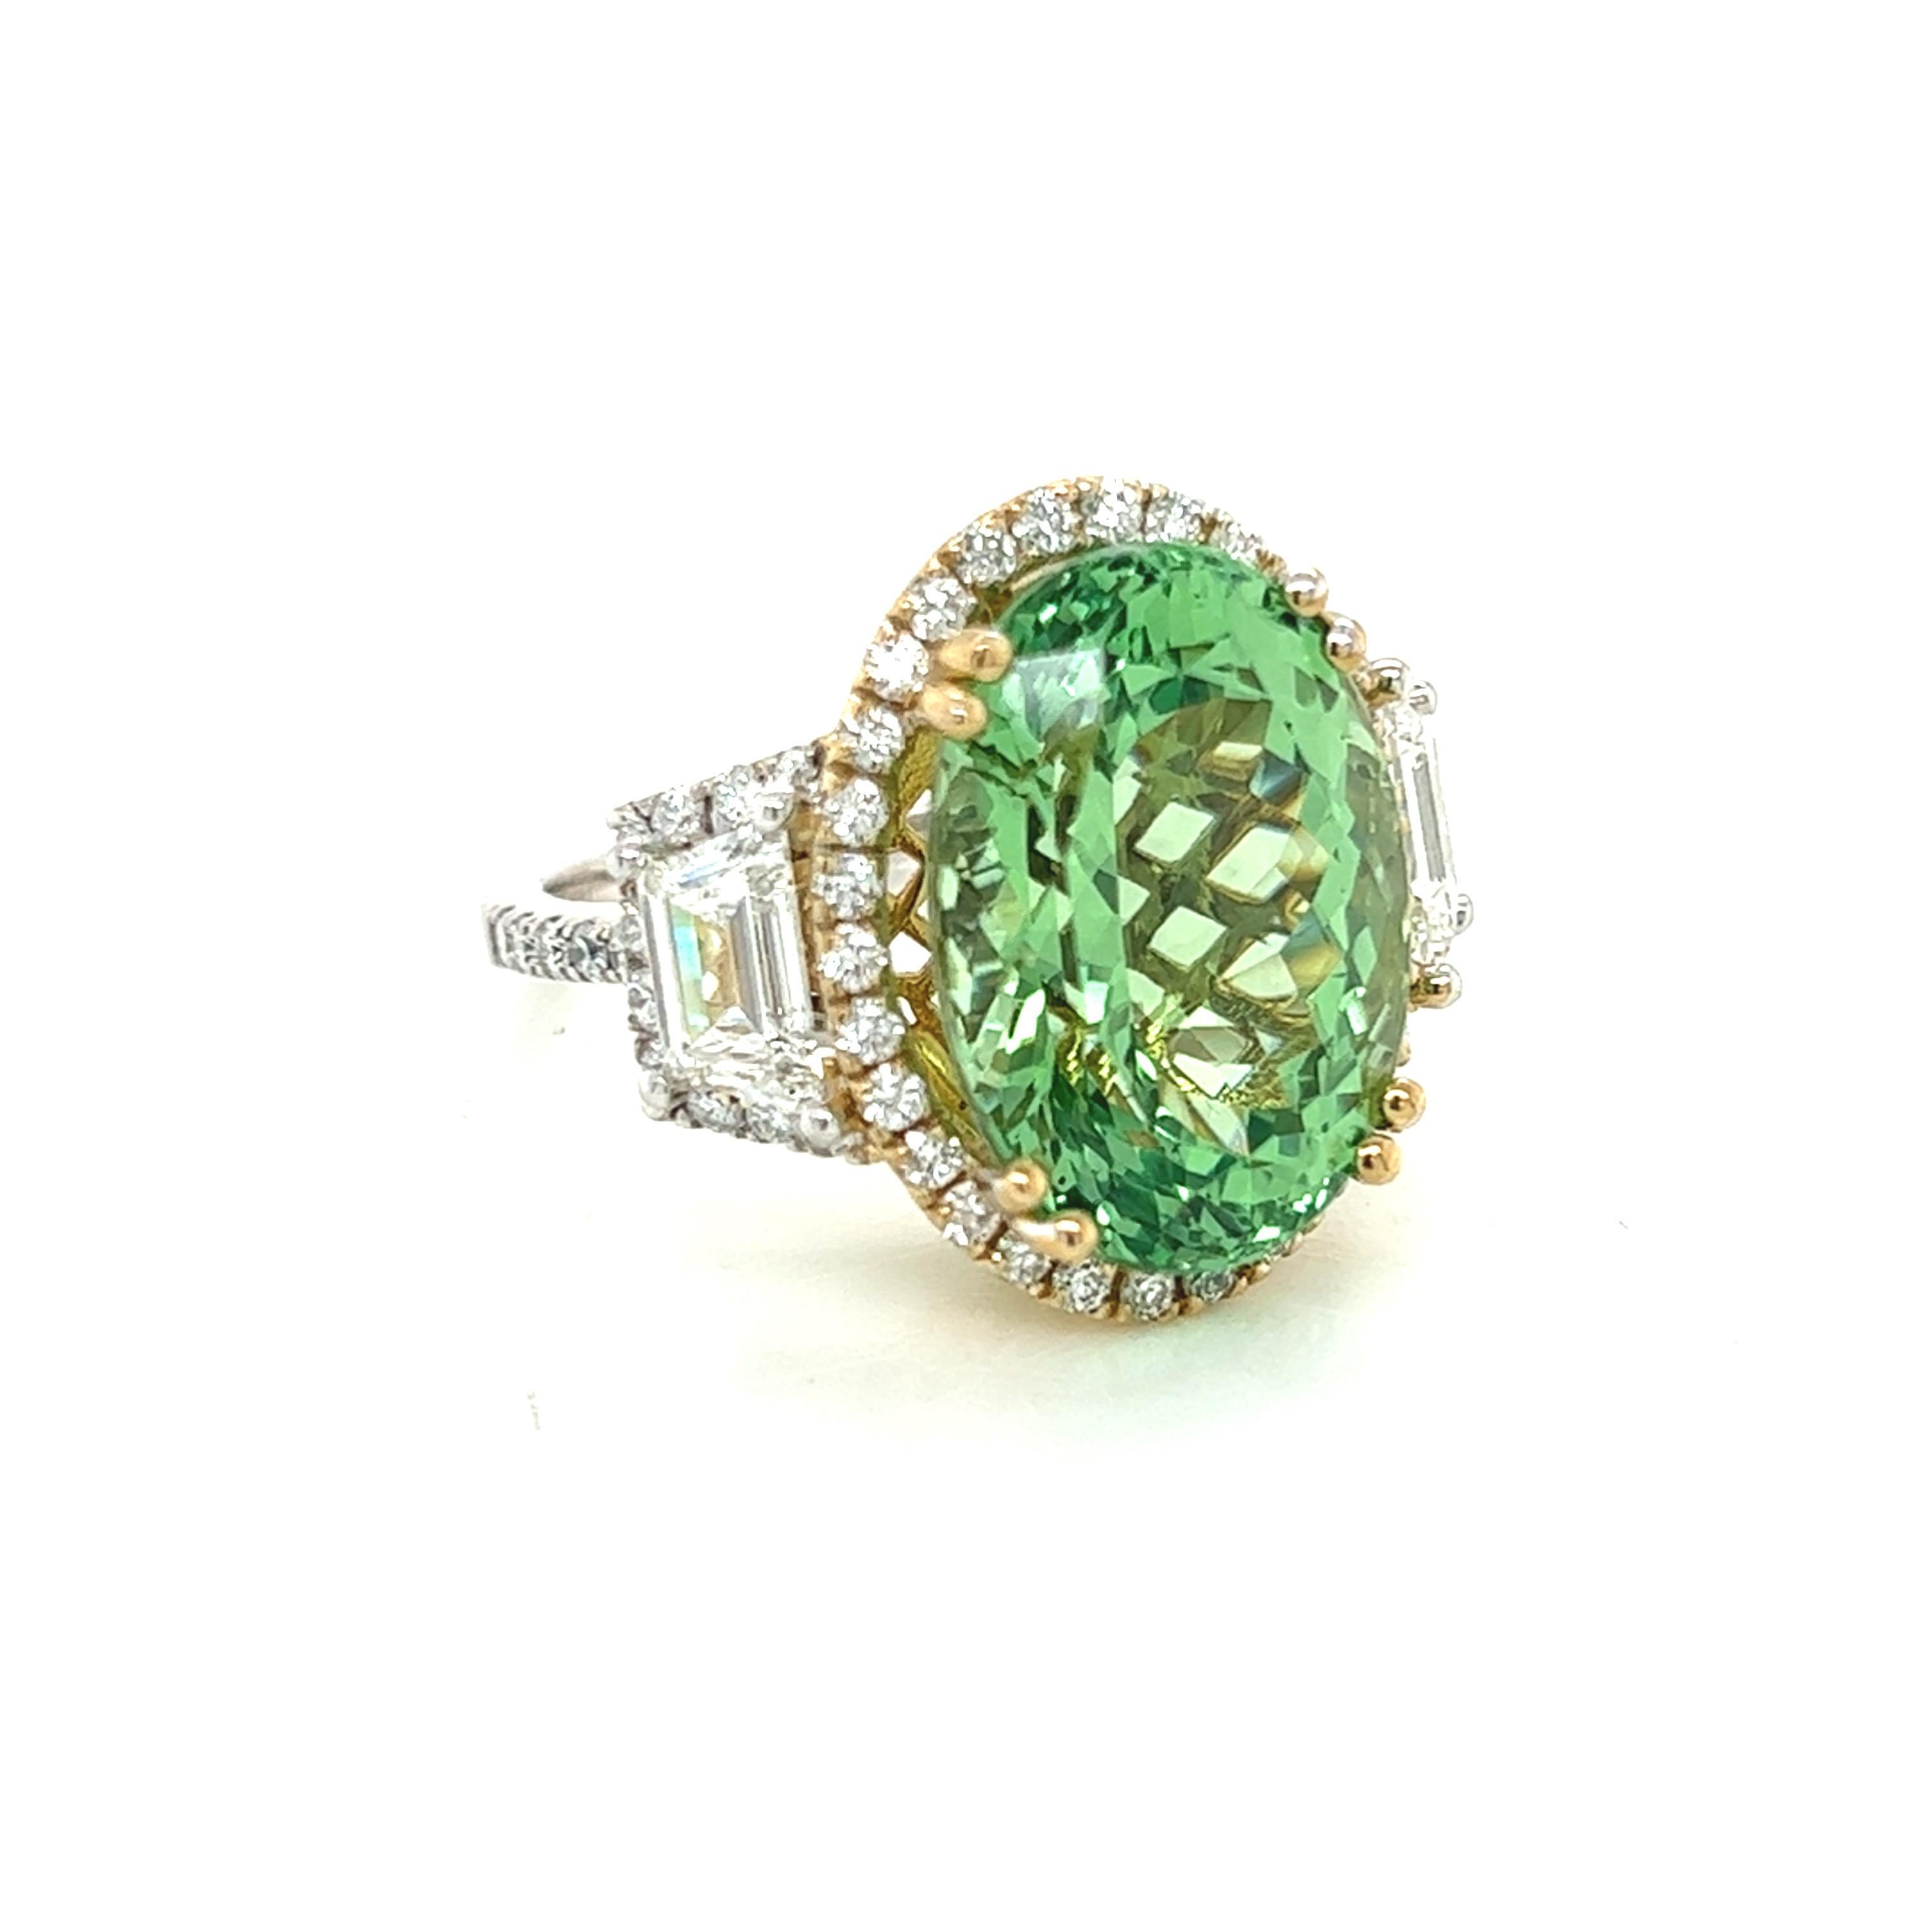 This stunning three stone ring features a sparkling 14.82 carat tsavorite garnet center stone, accented by two sparkling 1.26 carat diamond trapezoids. The ring is further adorned with 0.86 carats of sparkling diamond melee, making it the perfect